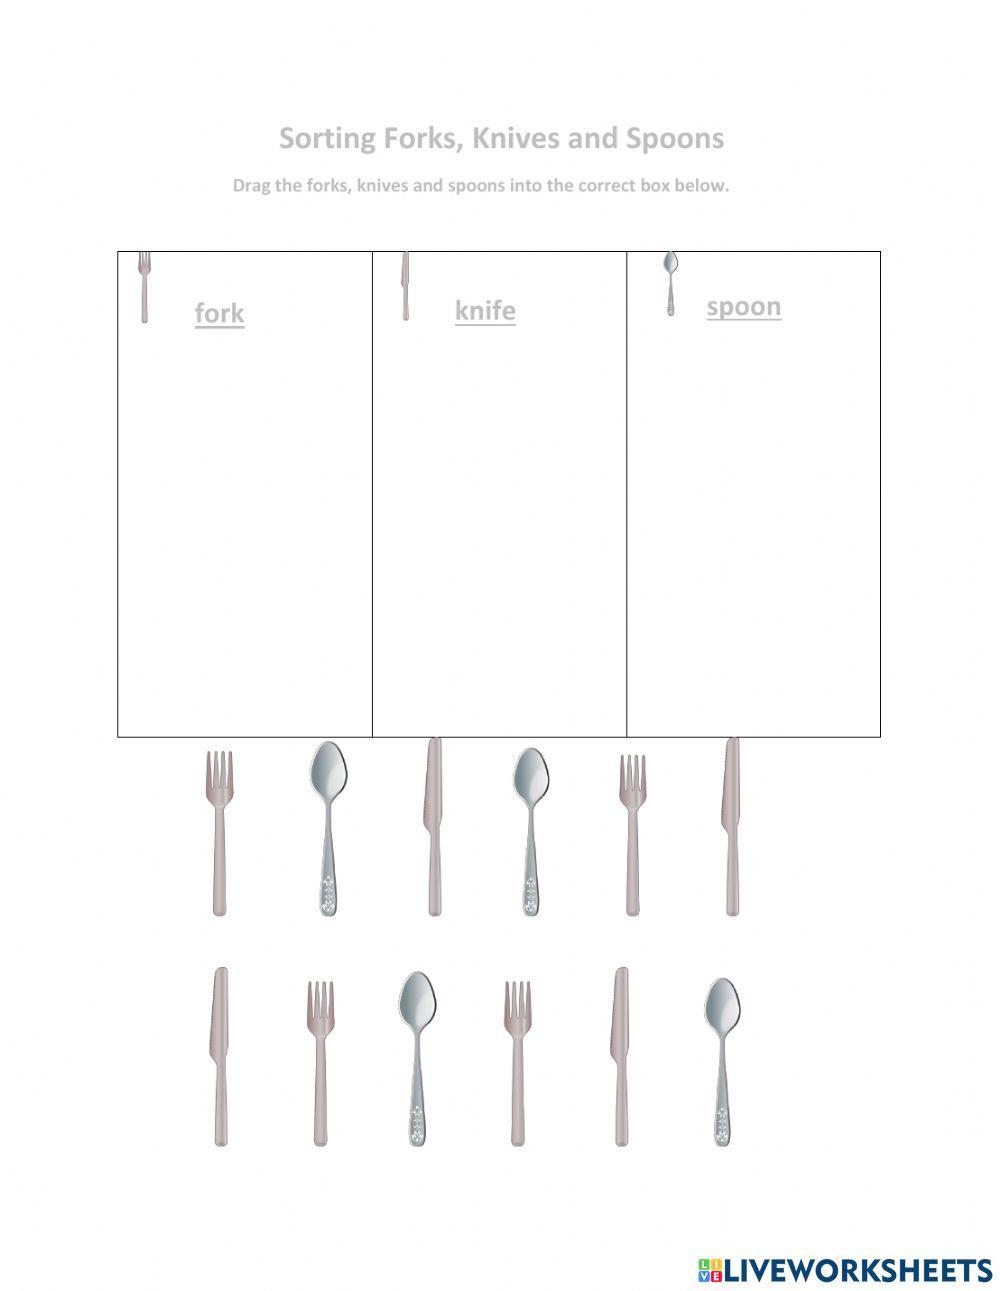 Sorting forks, knives and spoons